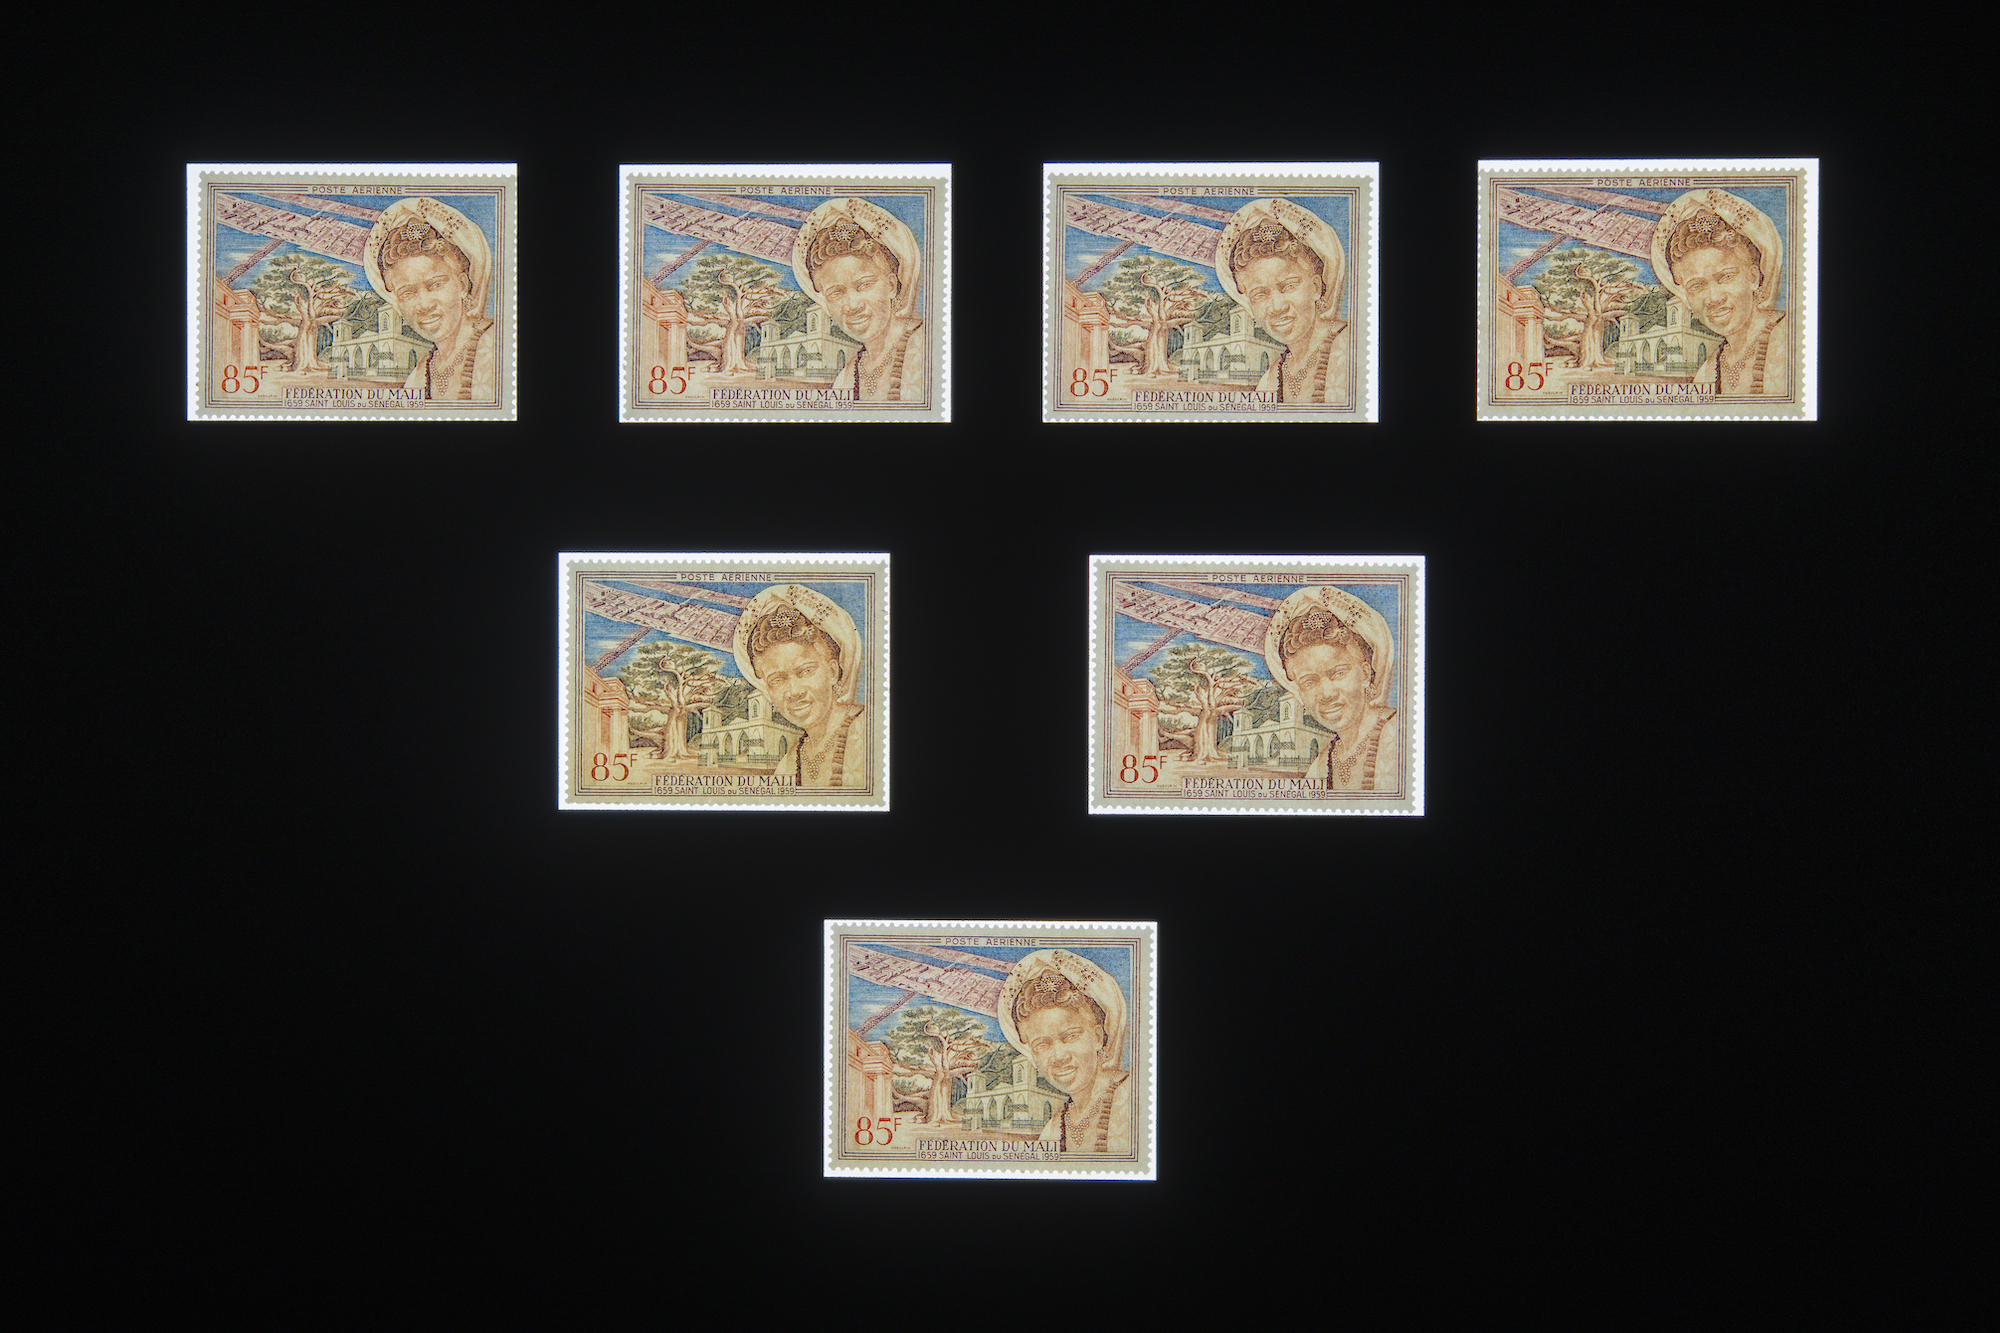 A series of seven identical stamps depicting a woman and a landscape with a building behind her, float against a black background, arranged in a symmetrical pattern.